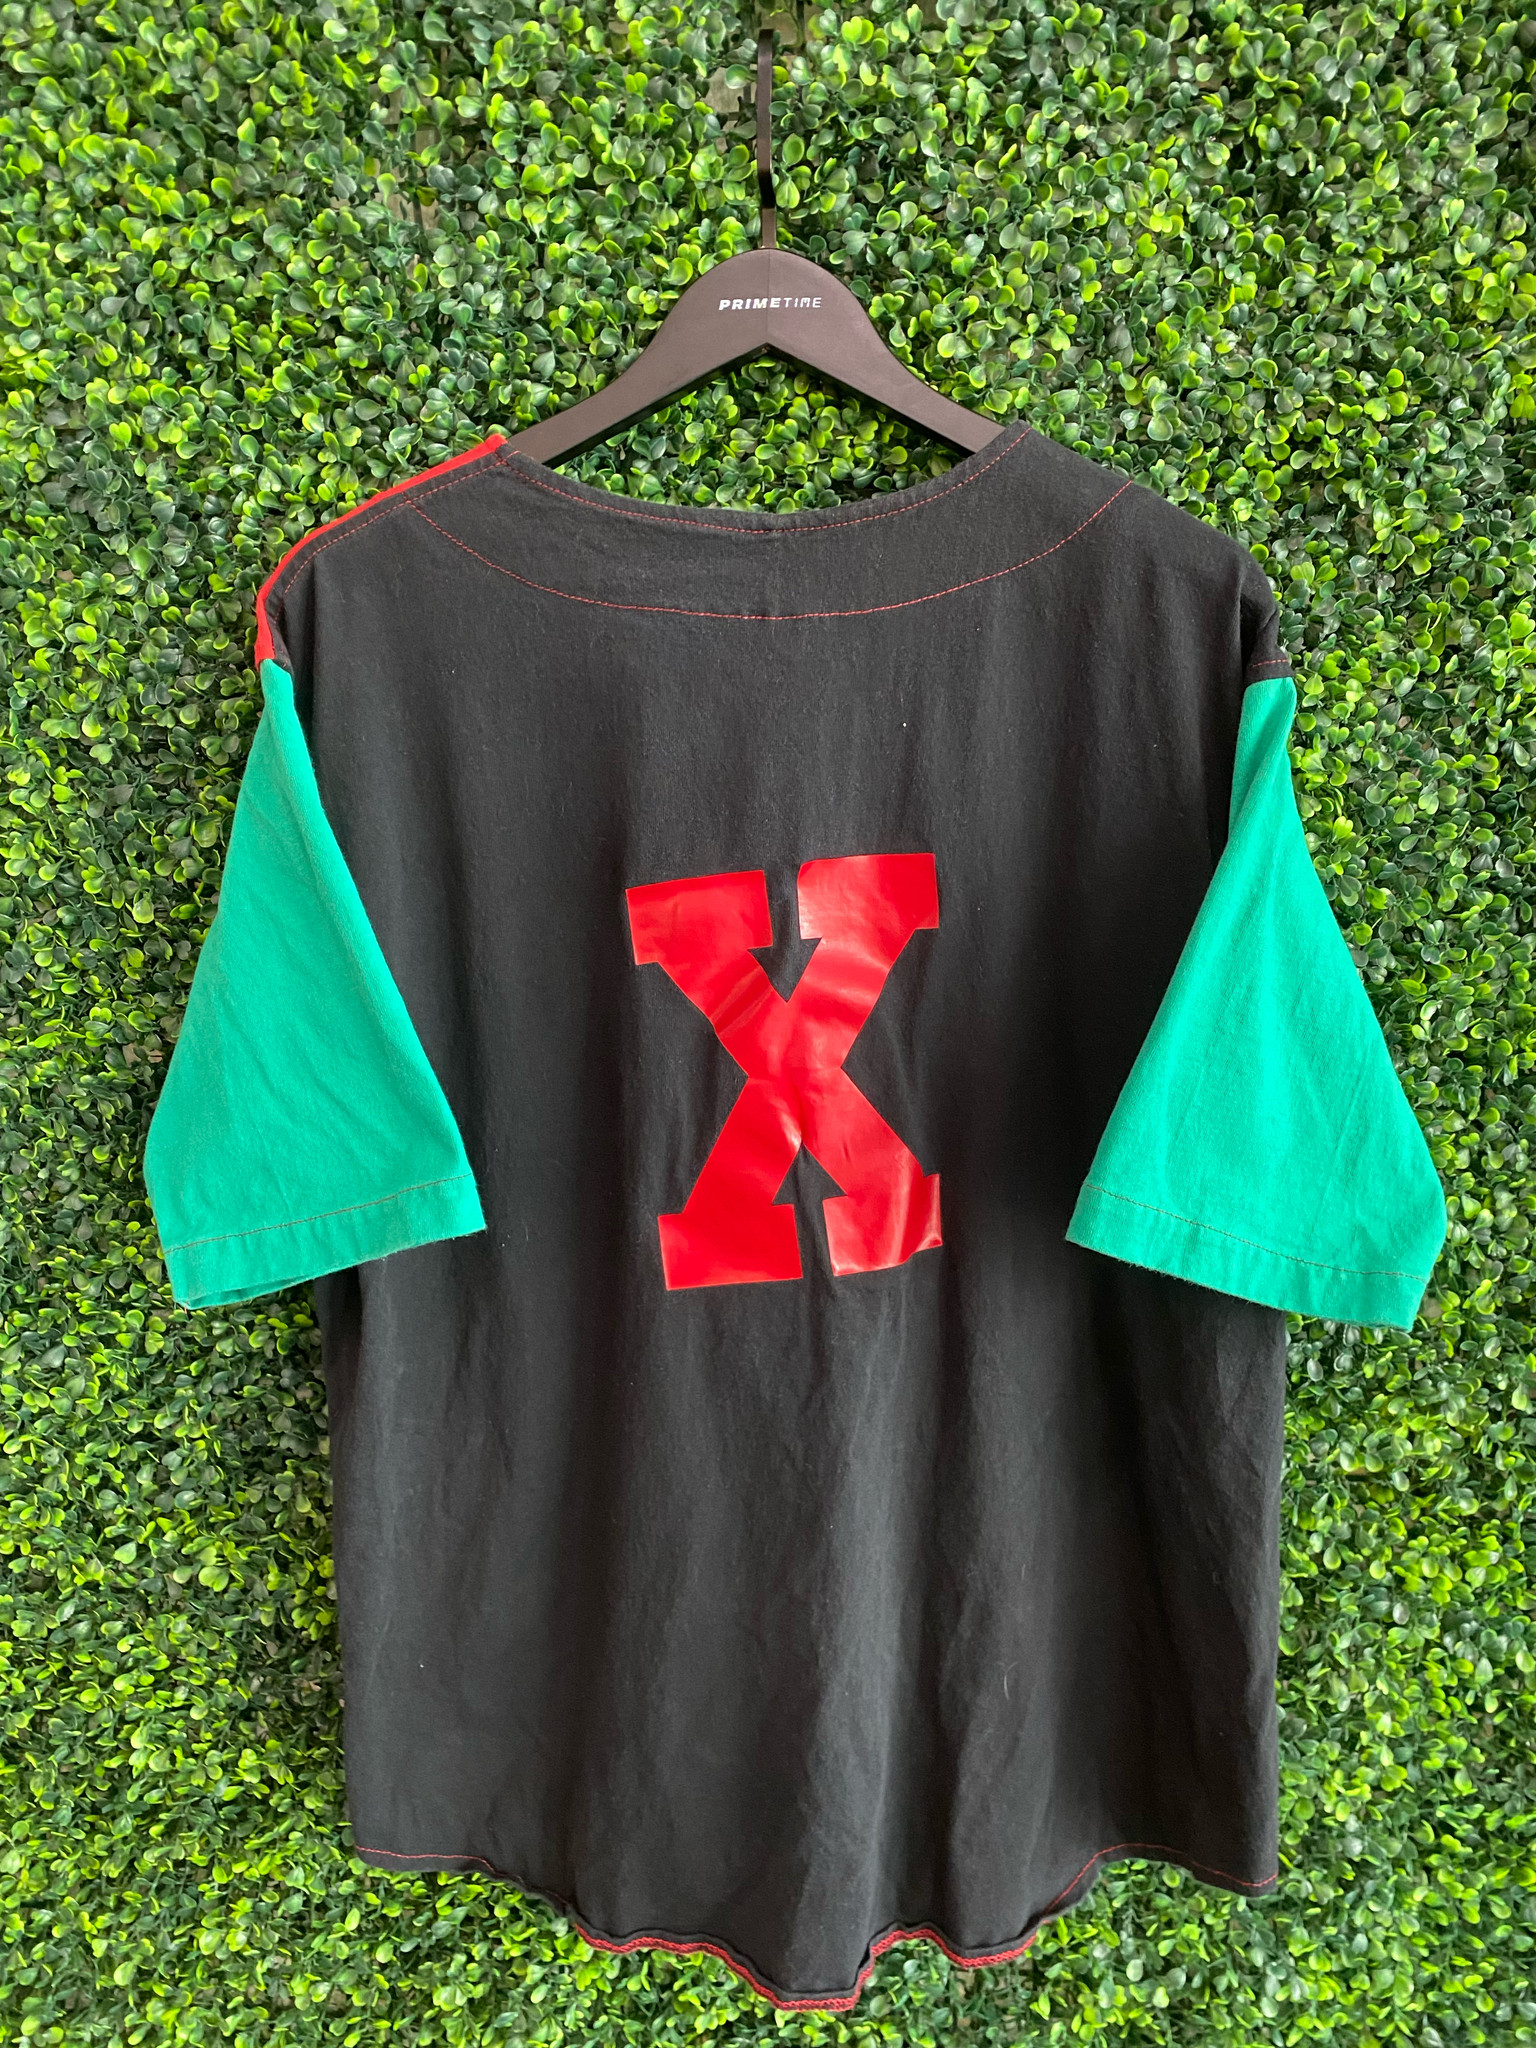 Malcolm x Black and Red Baseball Jersey 2XL